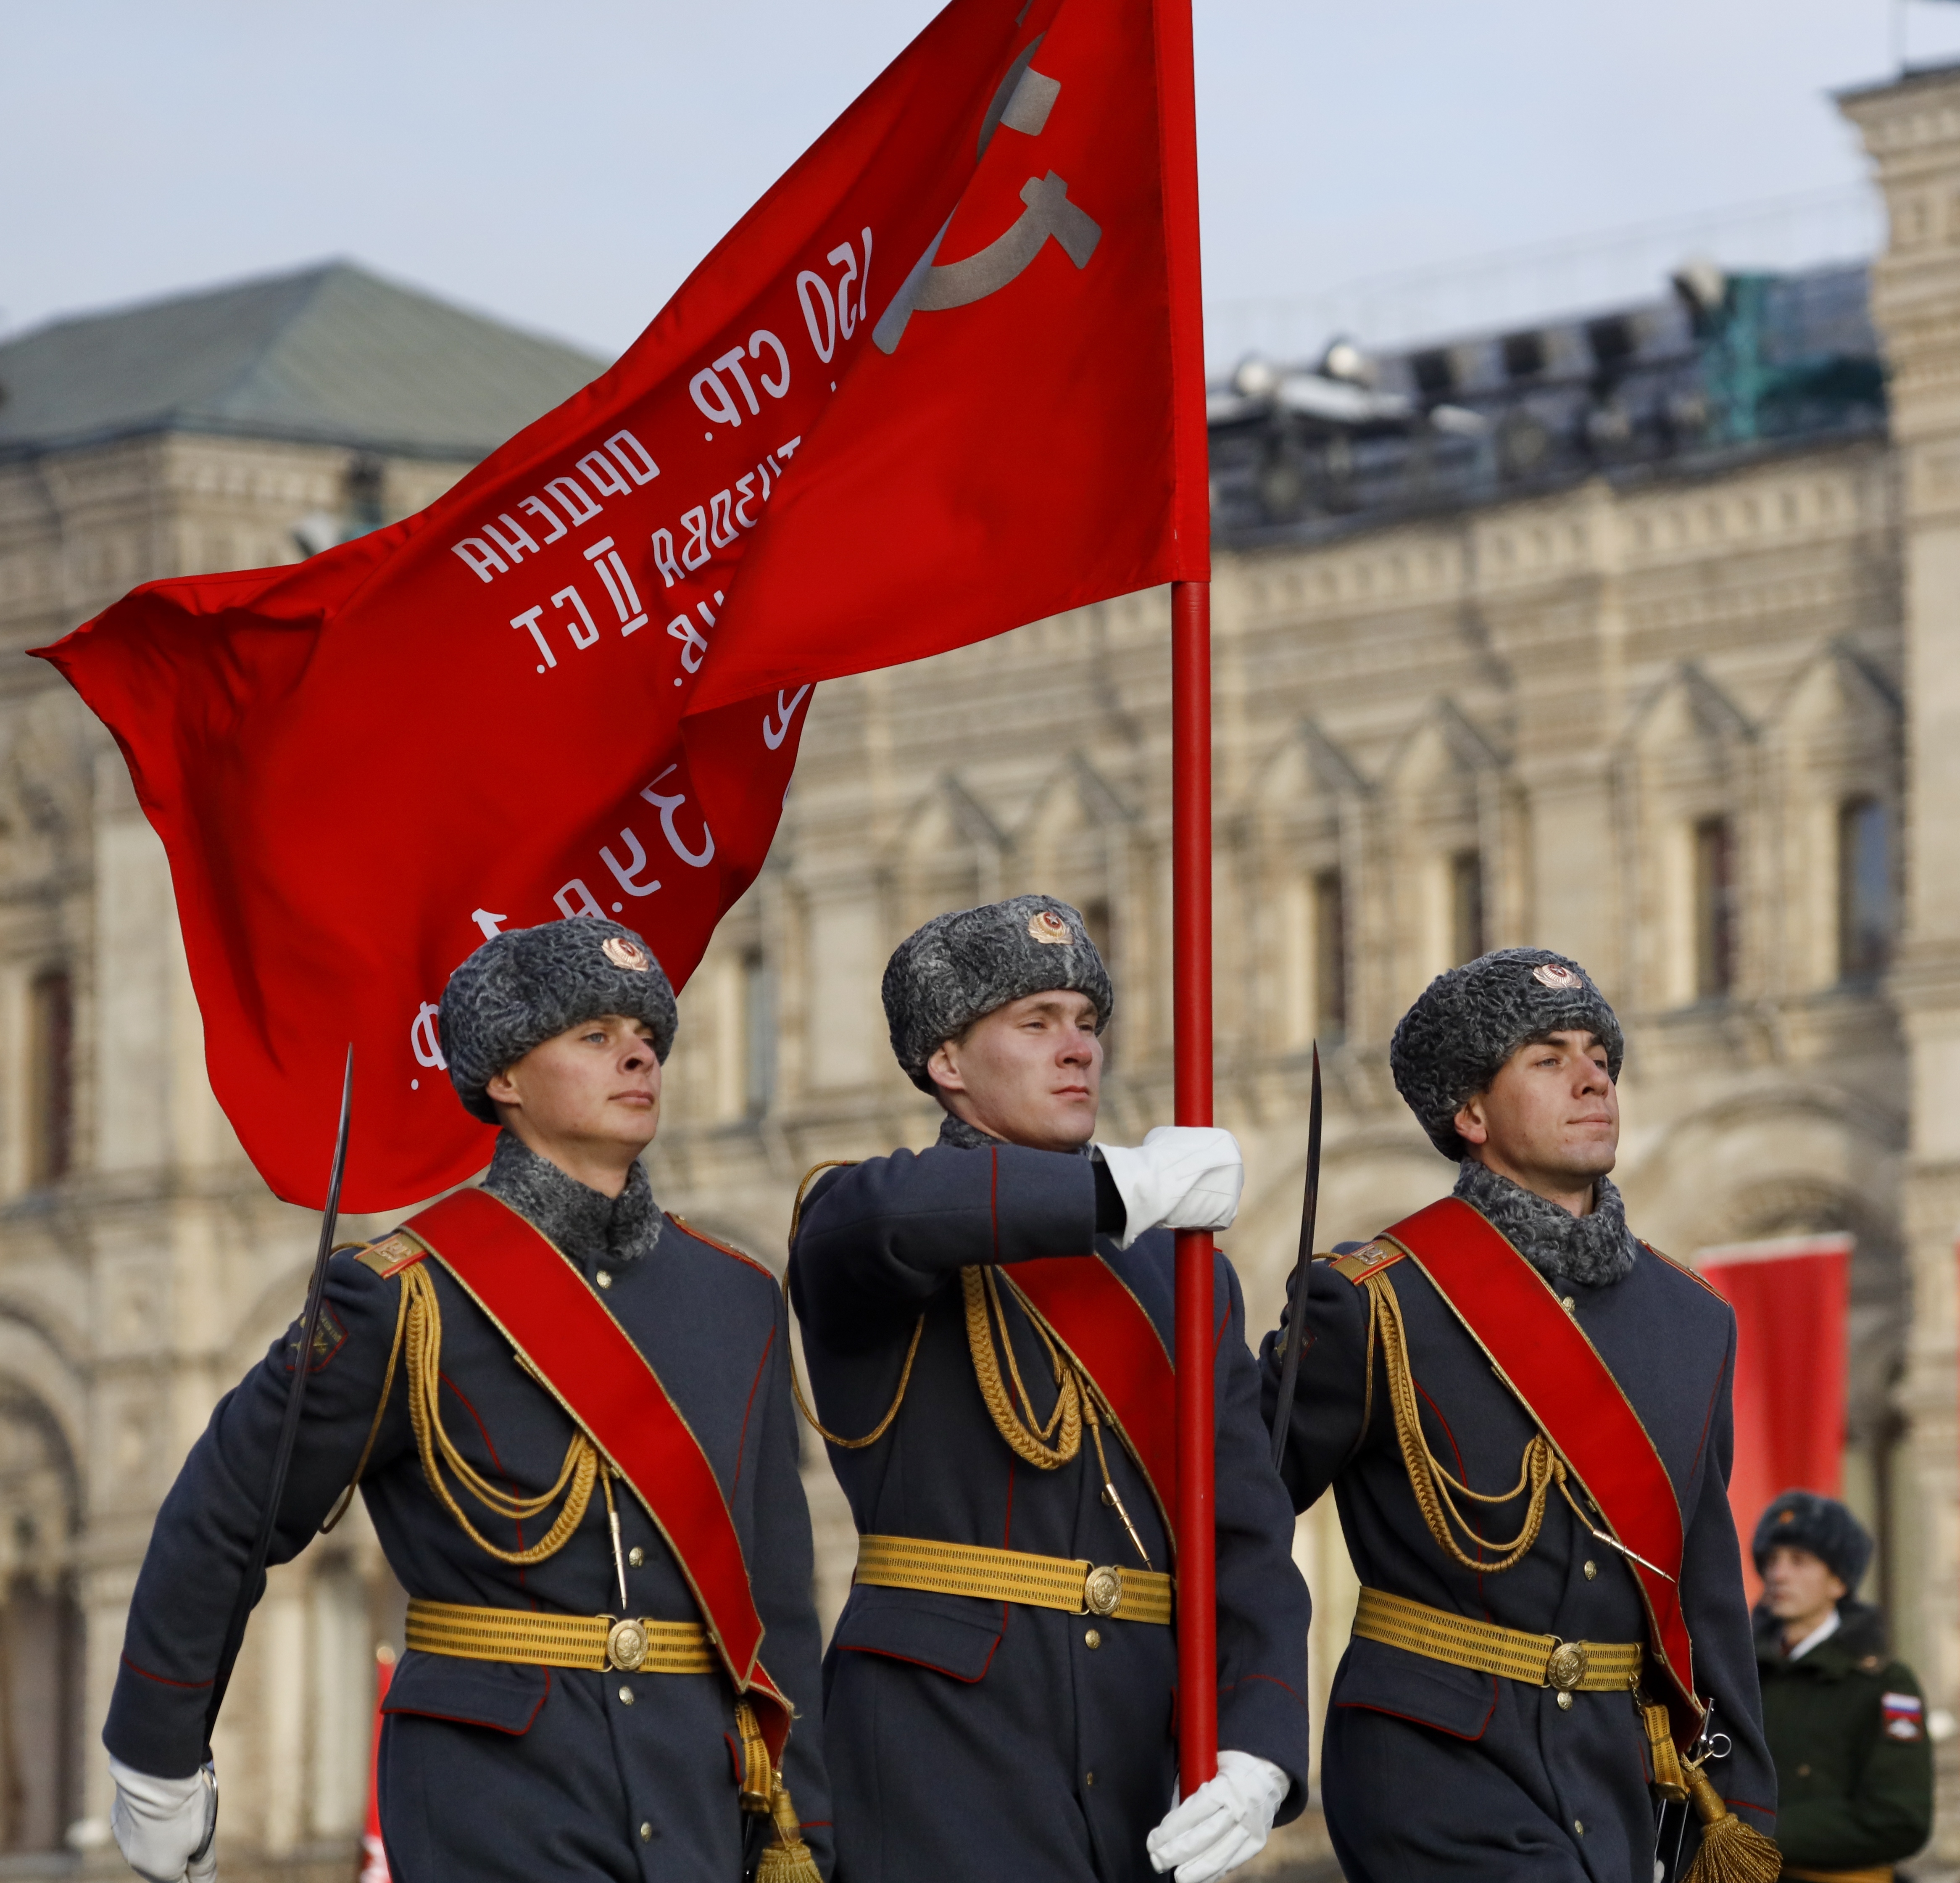 Russian soldiers march along Red Square during the Victory parade carrying the Victory in the WWII Flag during the Nov. 7 parade in Red Square, with St. Basil Cathedral and thew Spasskaya Tower in the background, in Moscow, Russia, Wednesday, Nov. 7, 2018. The event marked the 77th anniversary of a World War II historic parade in Red Square and honored the participants in the Nov. 7, 1941 parade who headed directly to the front lines to defend Moscow from the Nazi forces. (AP Photo/Alexander Zemlianichenko)